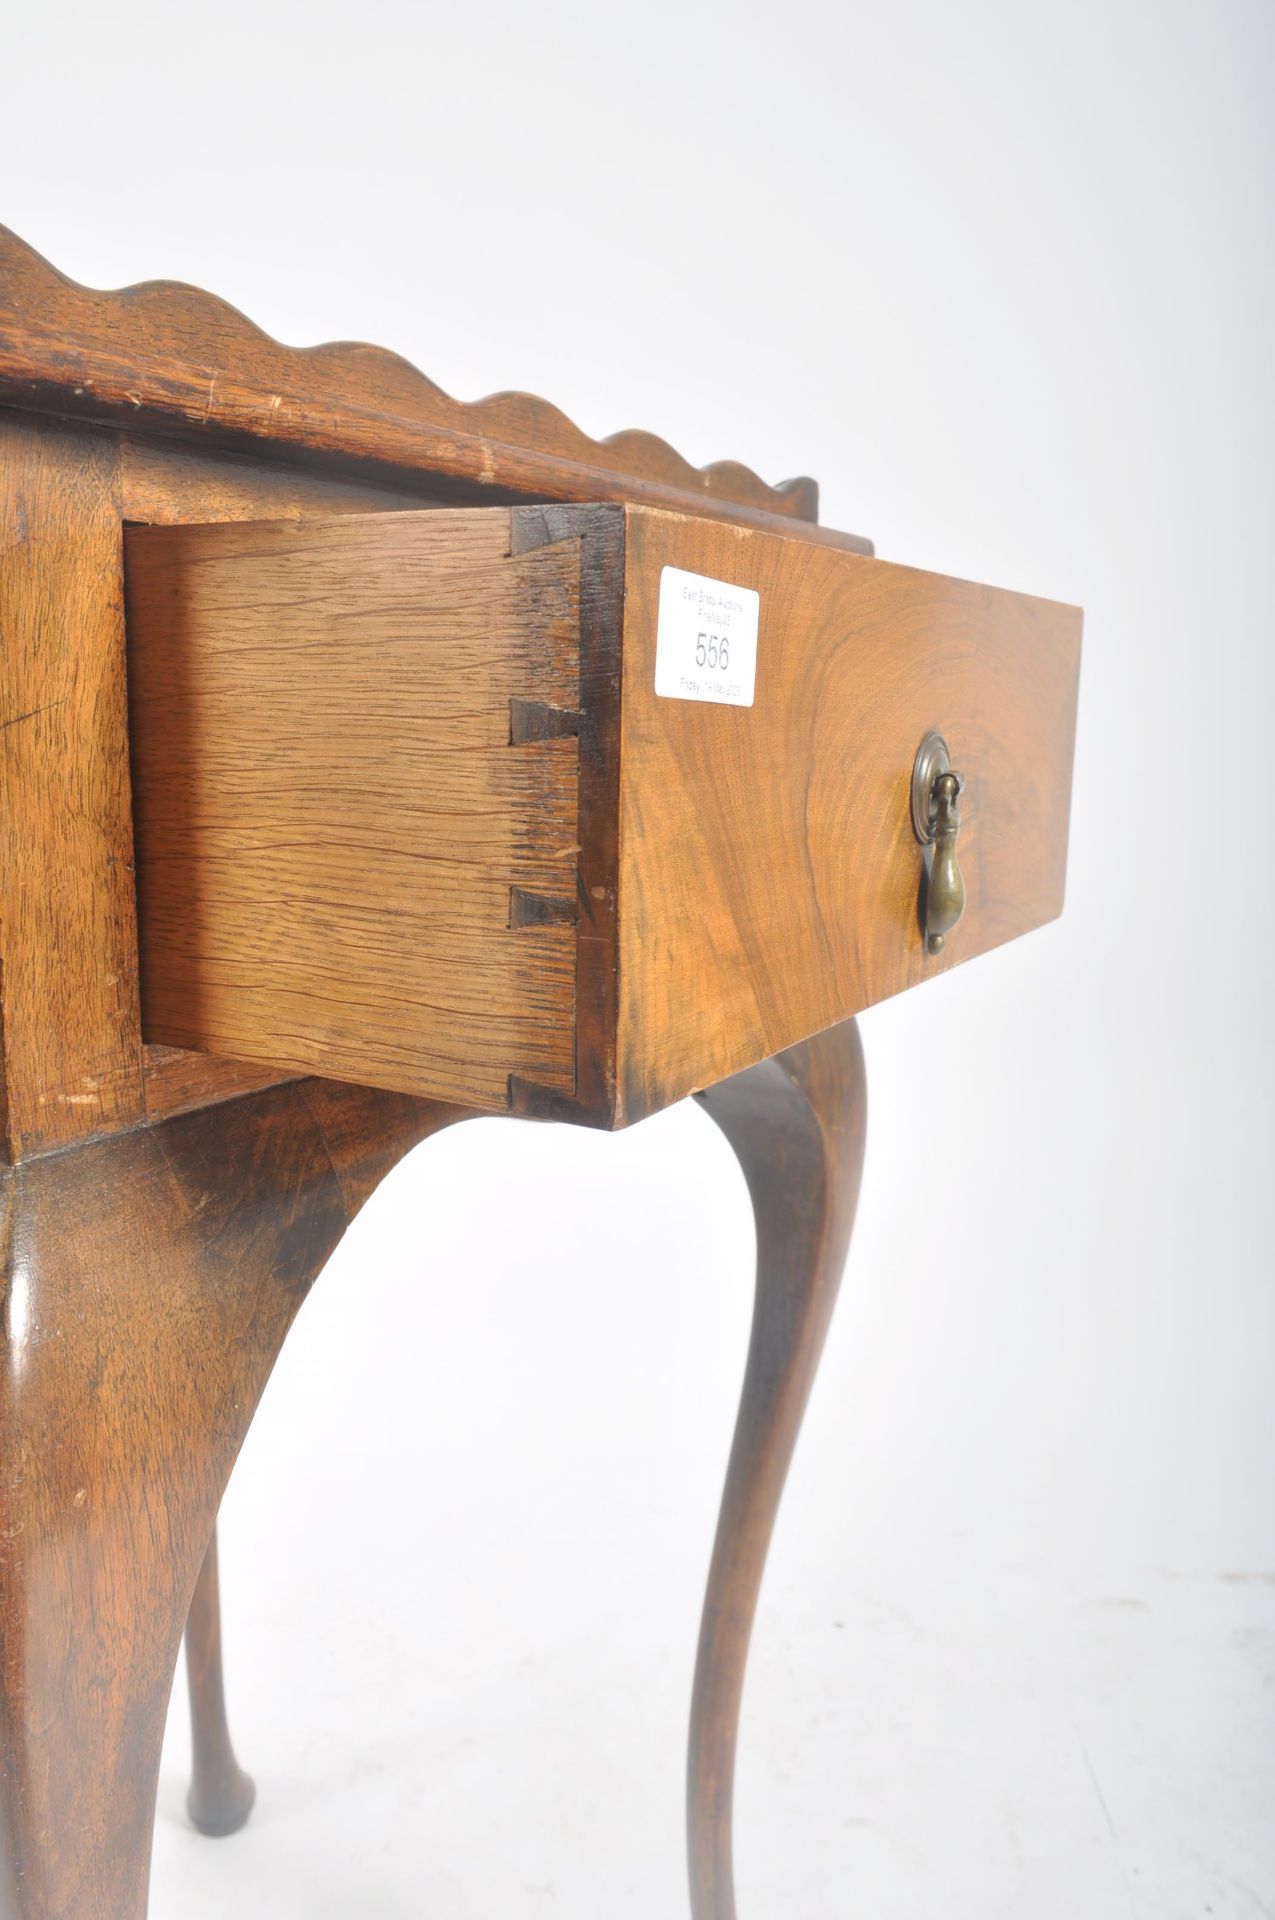 QUEEN ANNE REVIVAL CIRCA 1900 WALNUT BEDSIDE CABINET TABLE - Image 5 of 8